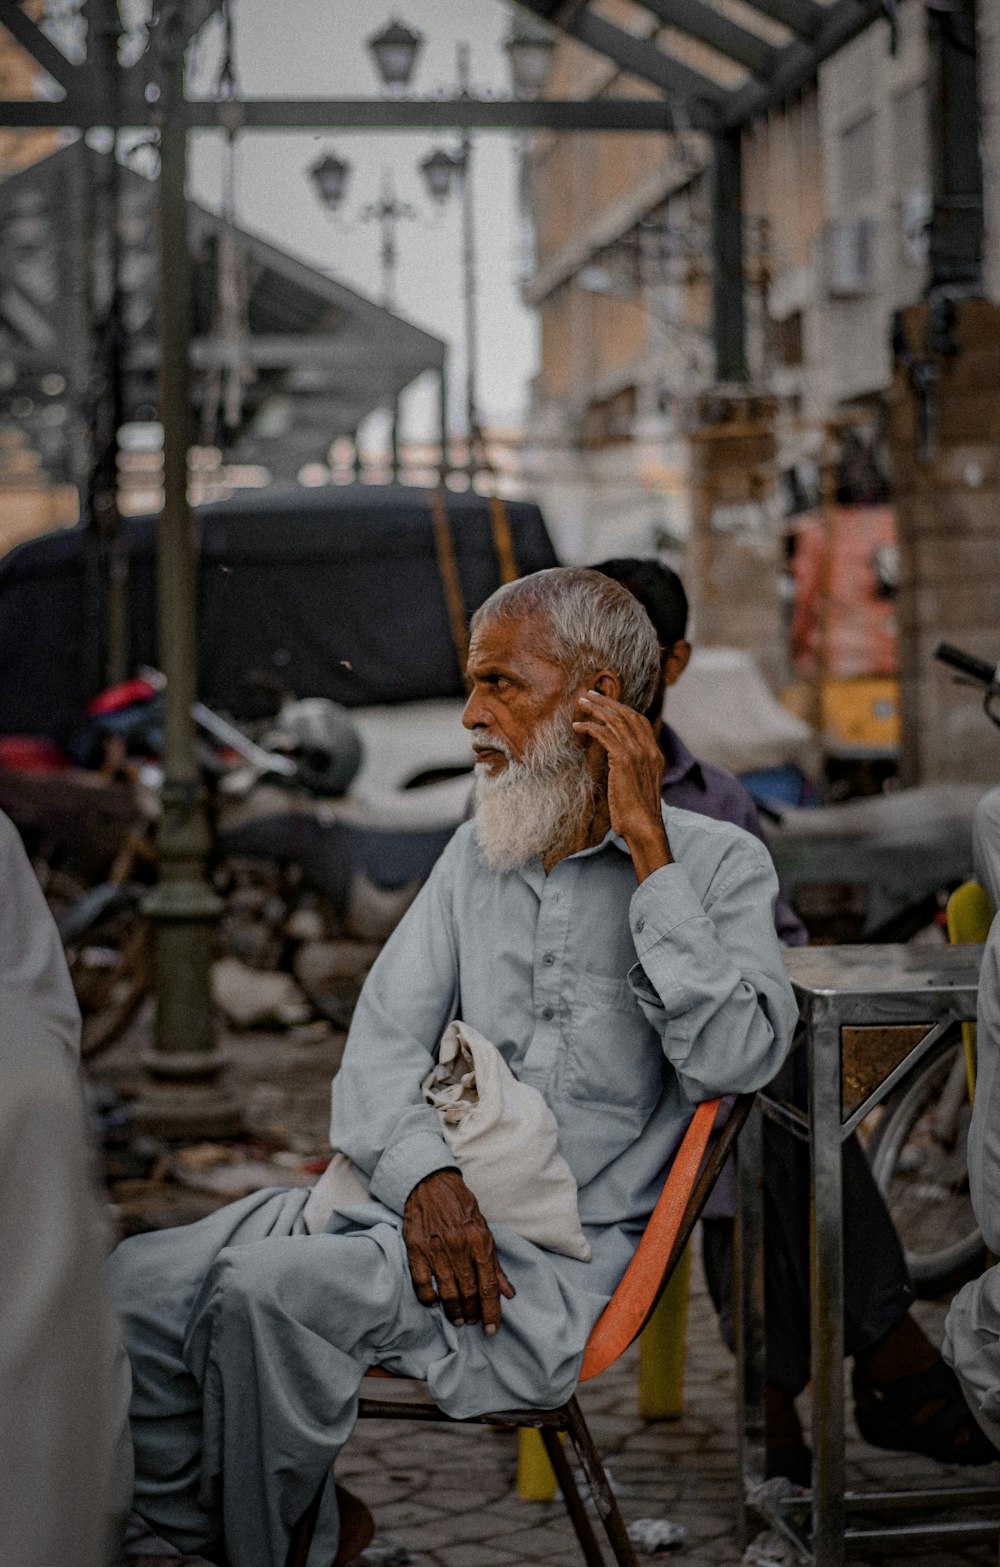 a man sitting in a chair talking on a cell phone